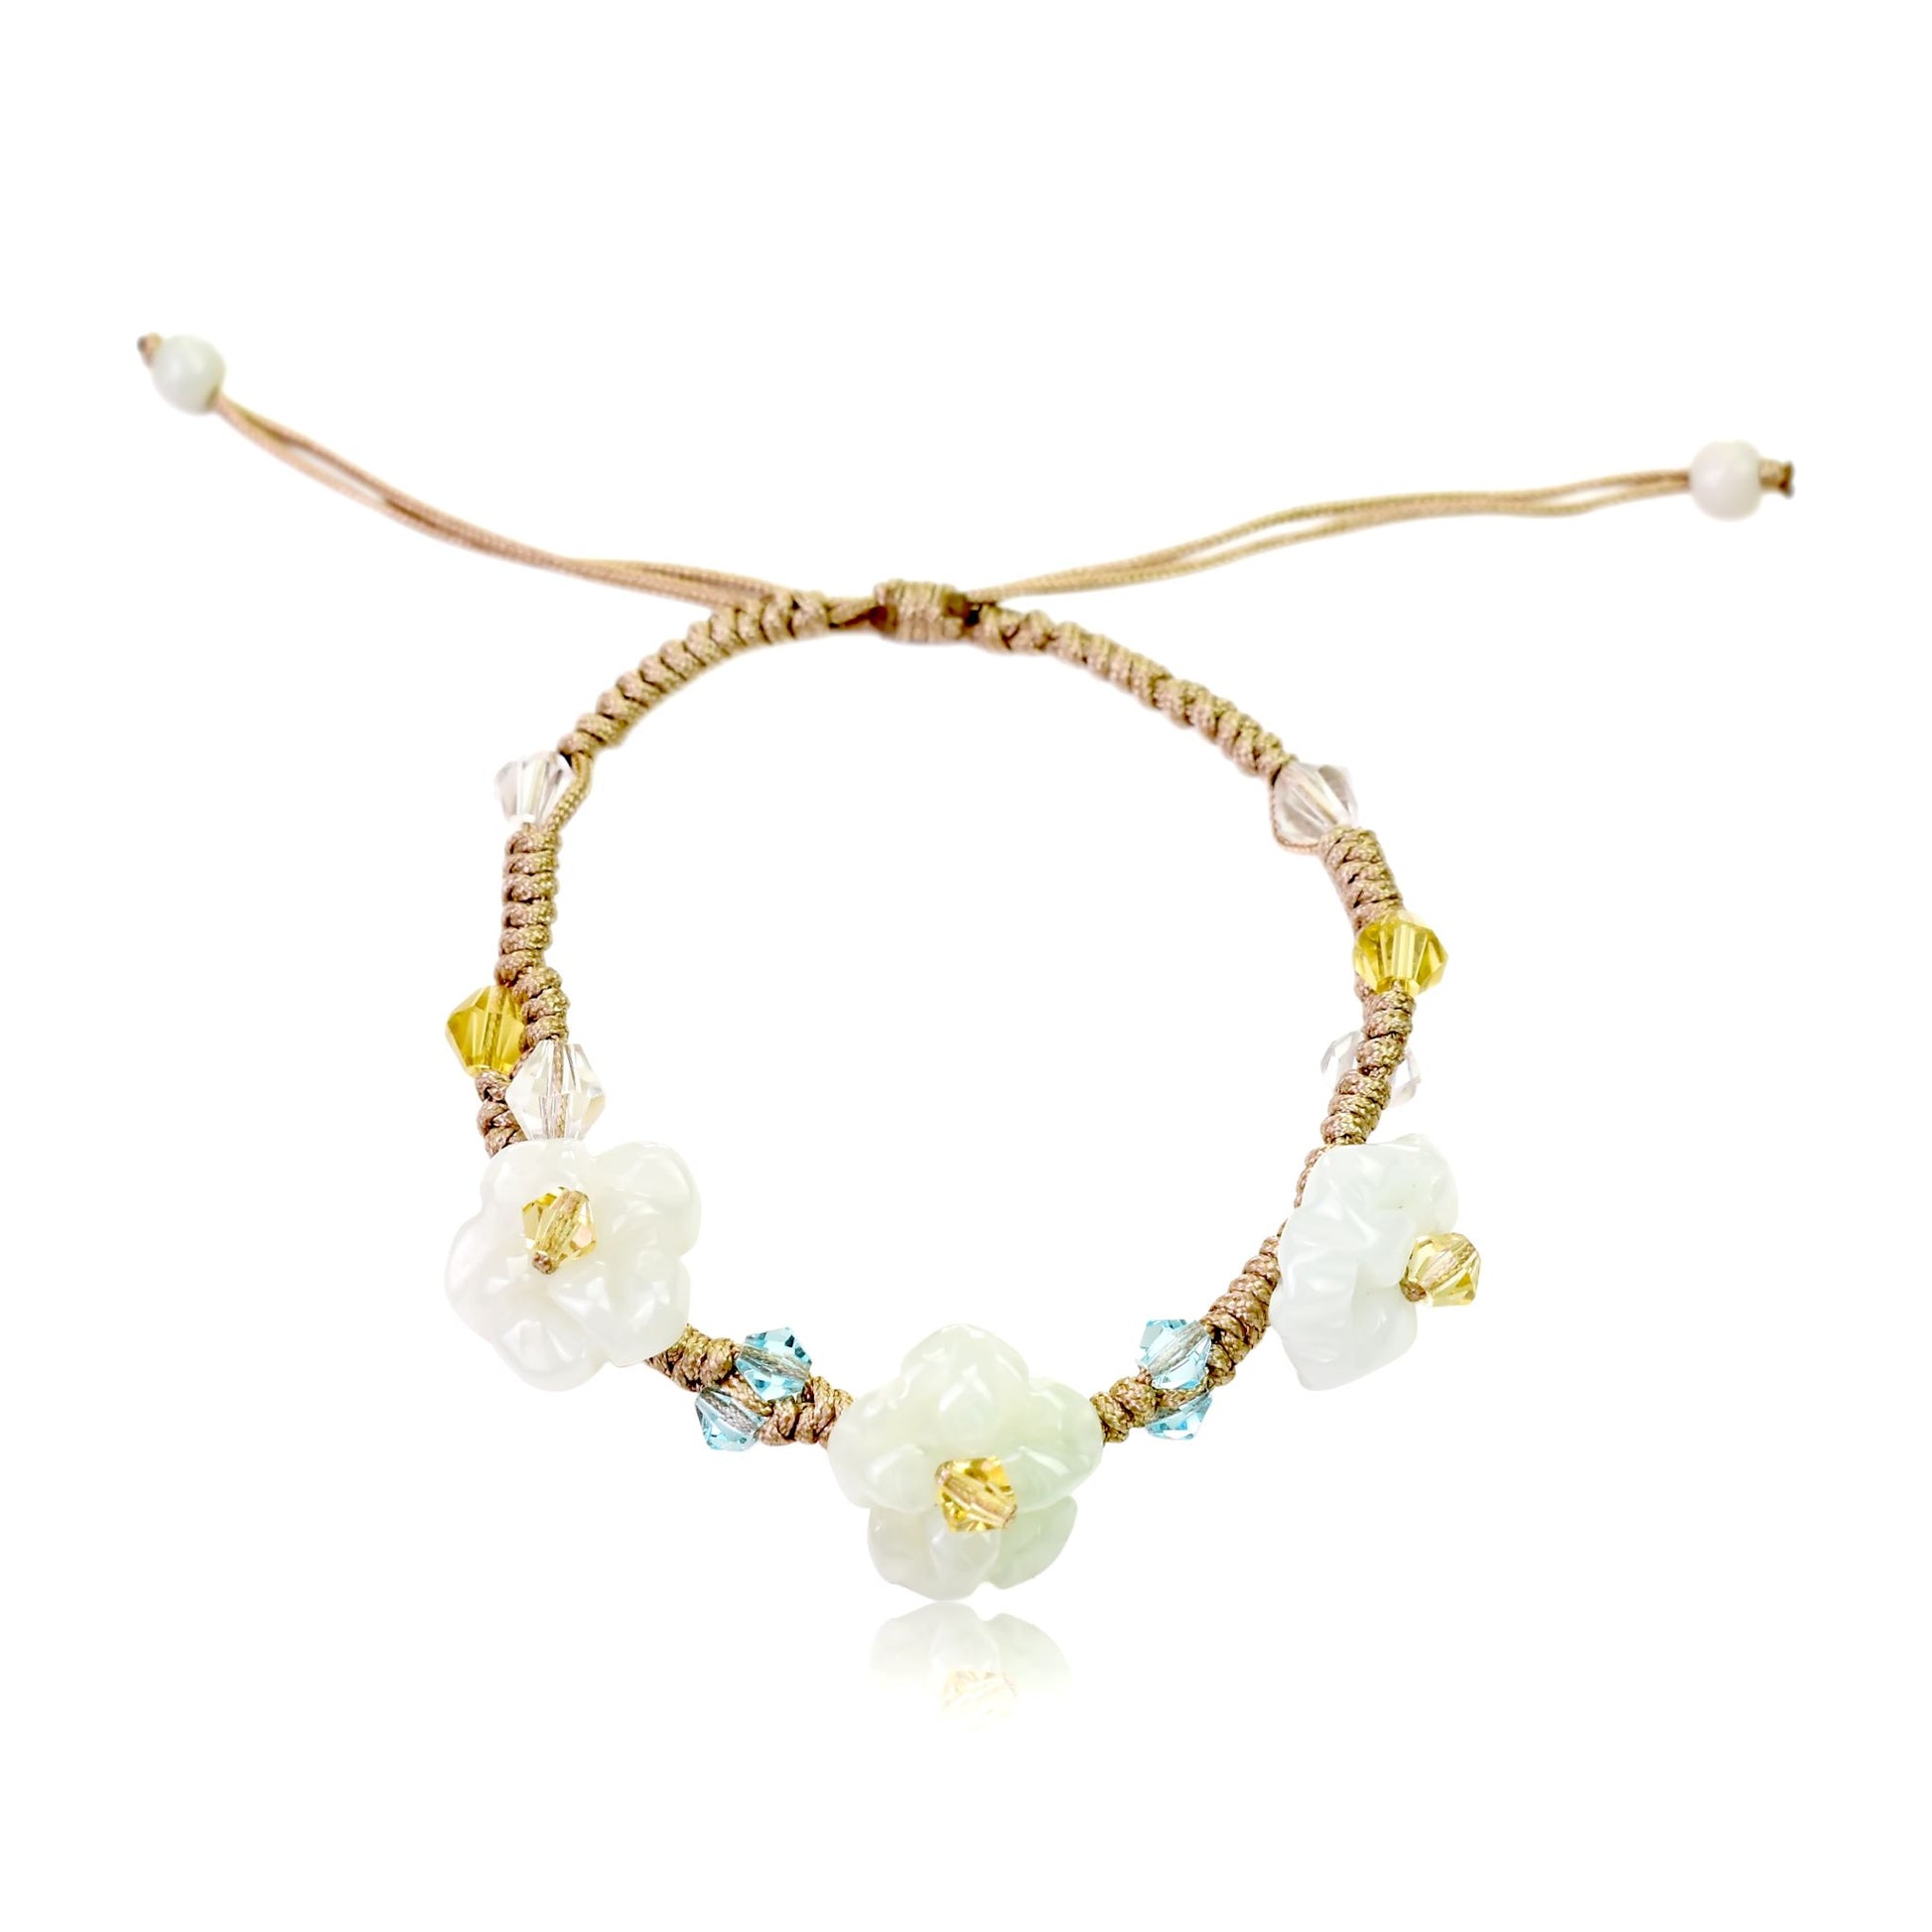 Wear Beauty with this Sparkling Crystal Scarlet Pimpernel Flower Bracelet made with Beige Cord